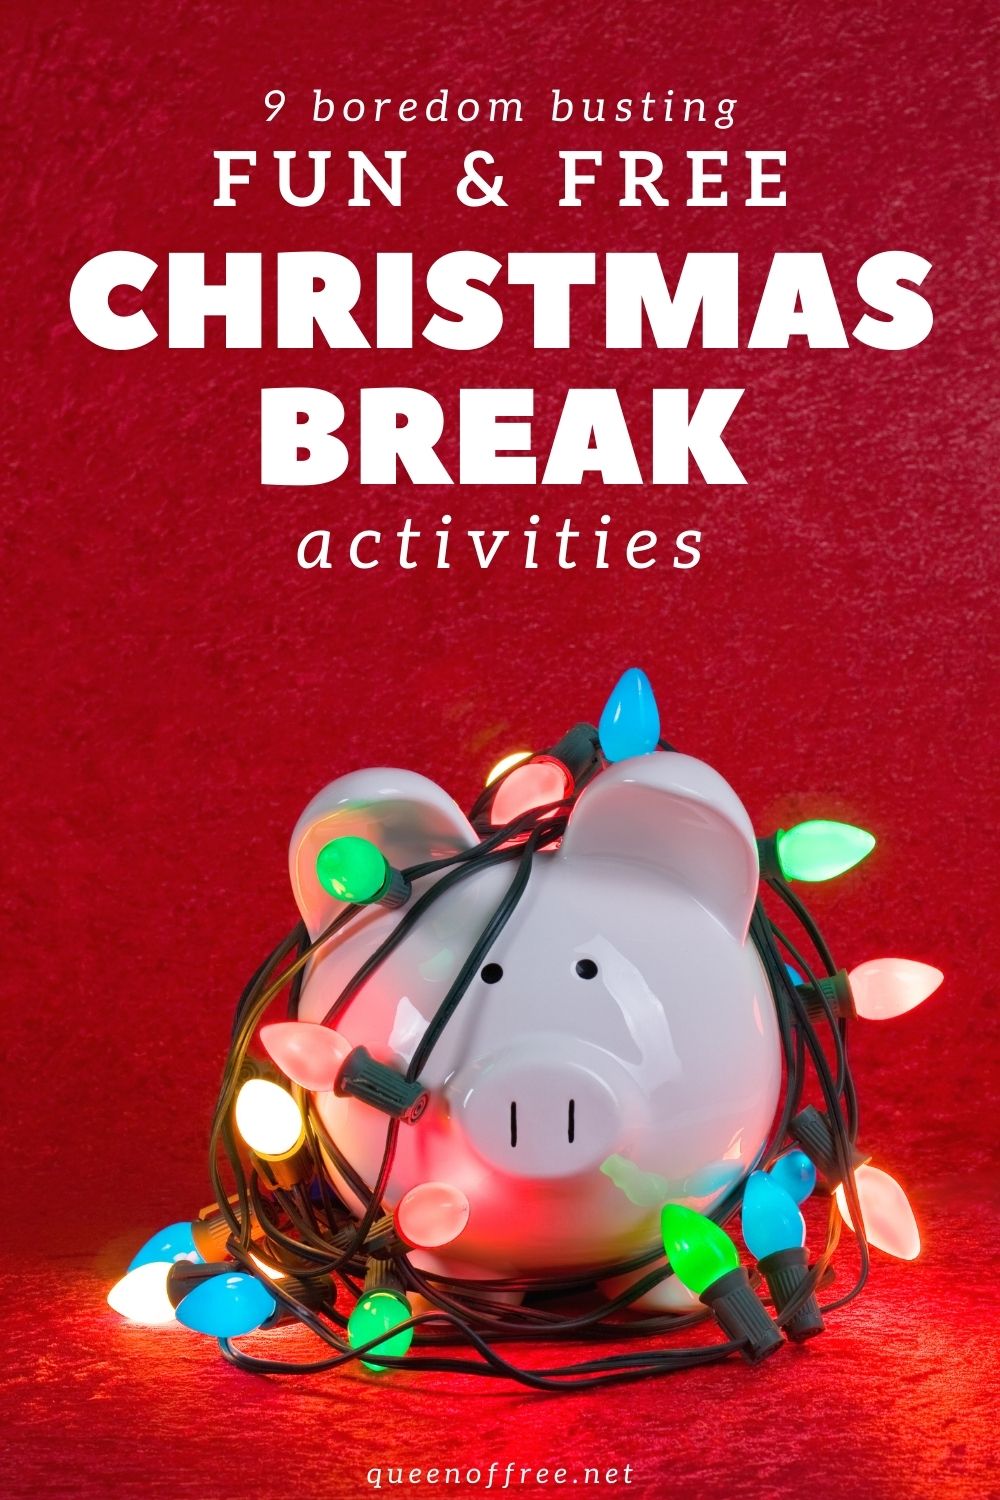 Making memories doesn't have to cost a bundle! Keep the kids busy with these simple FREE Christmas Break Family Fun Ideas.